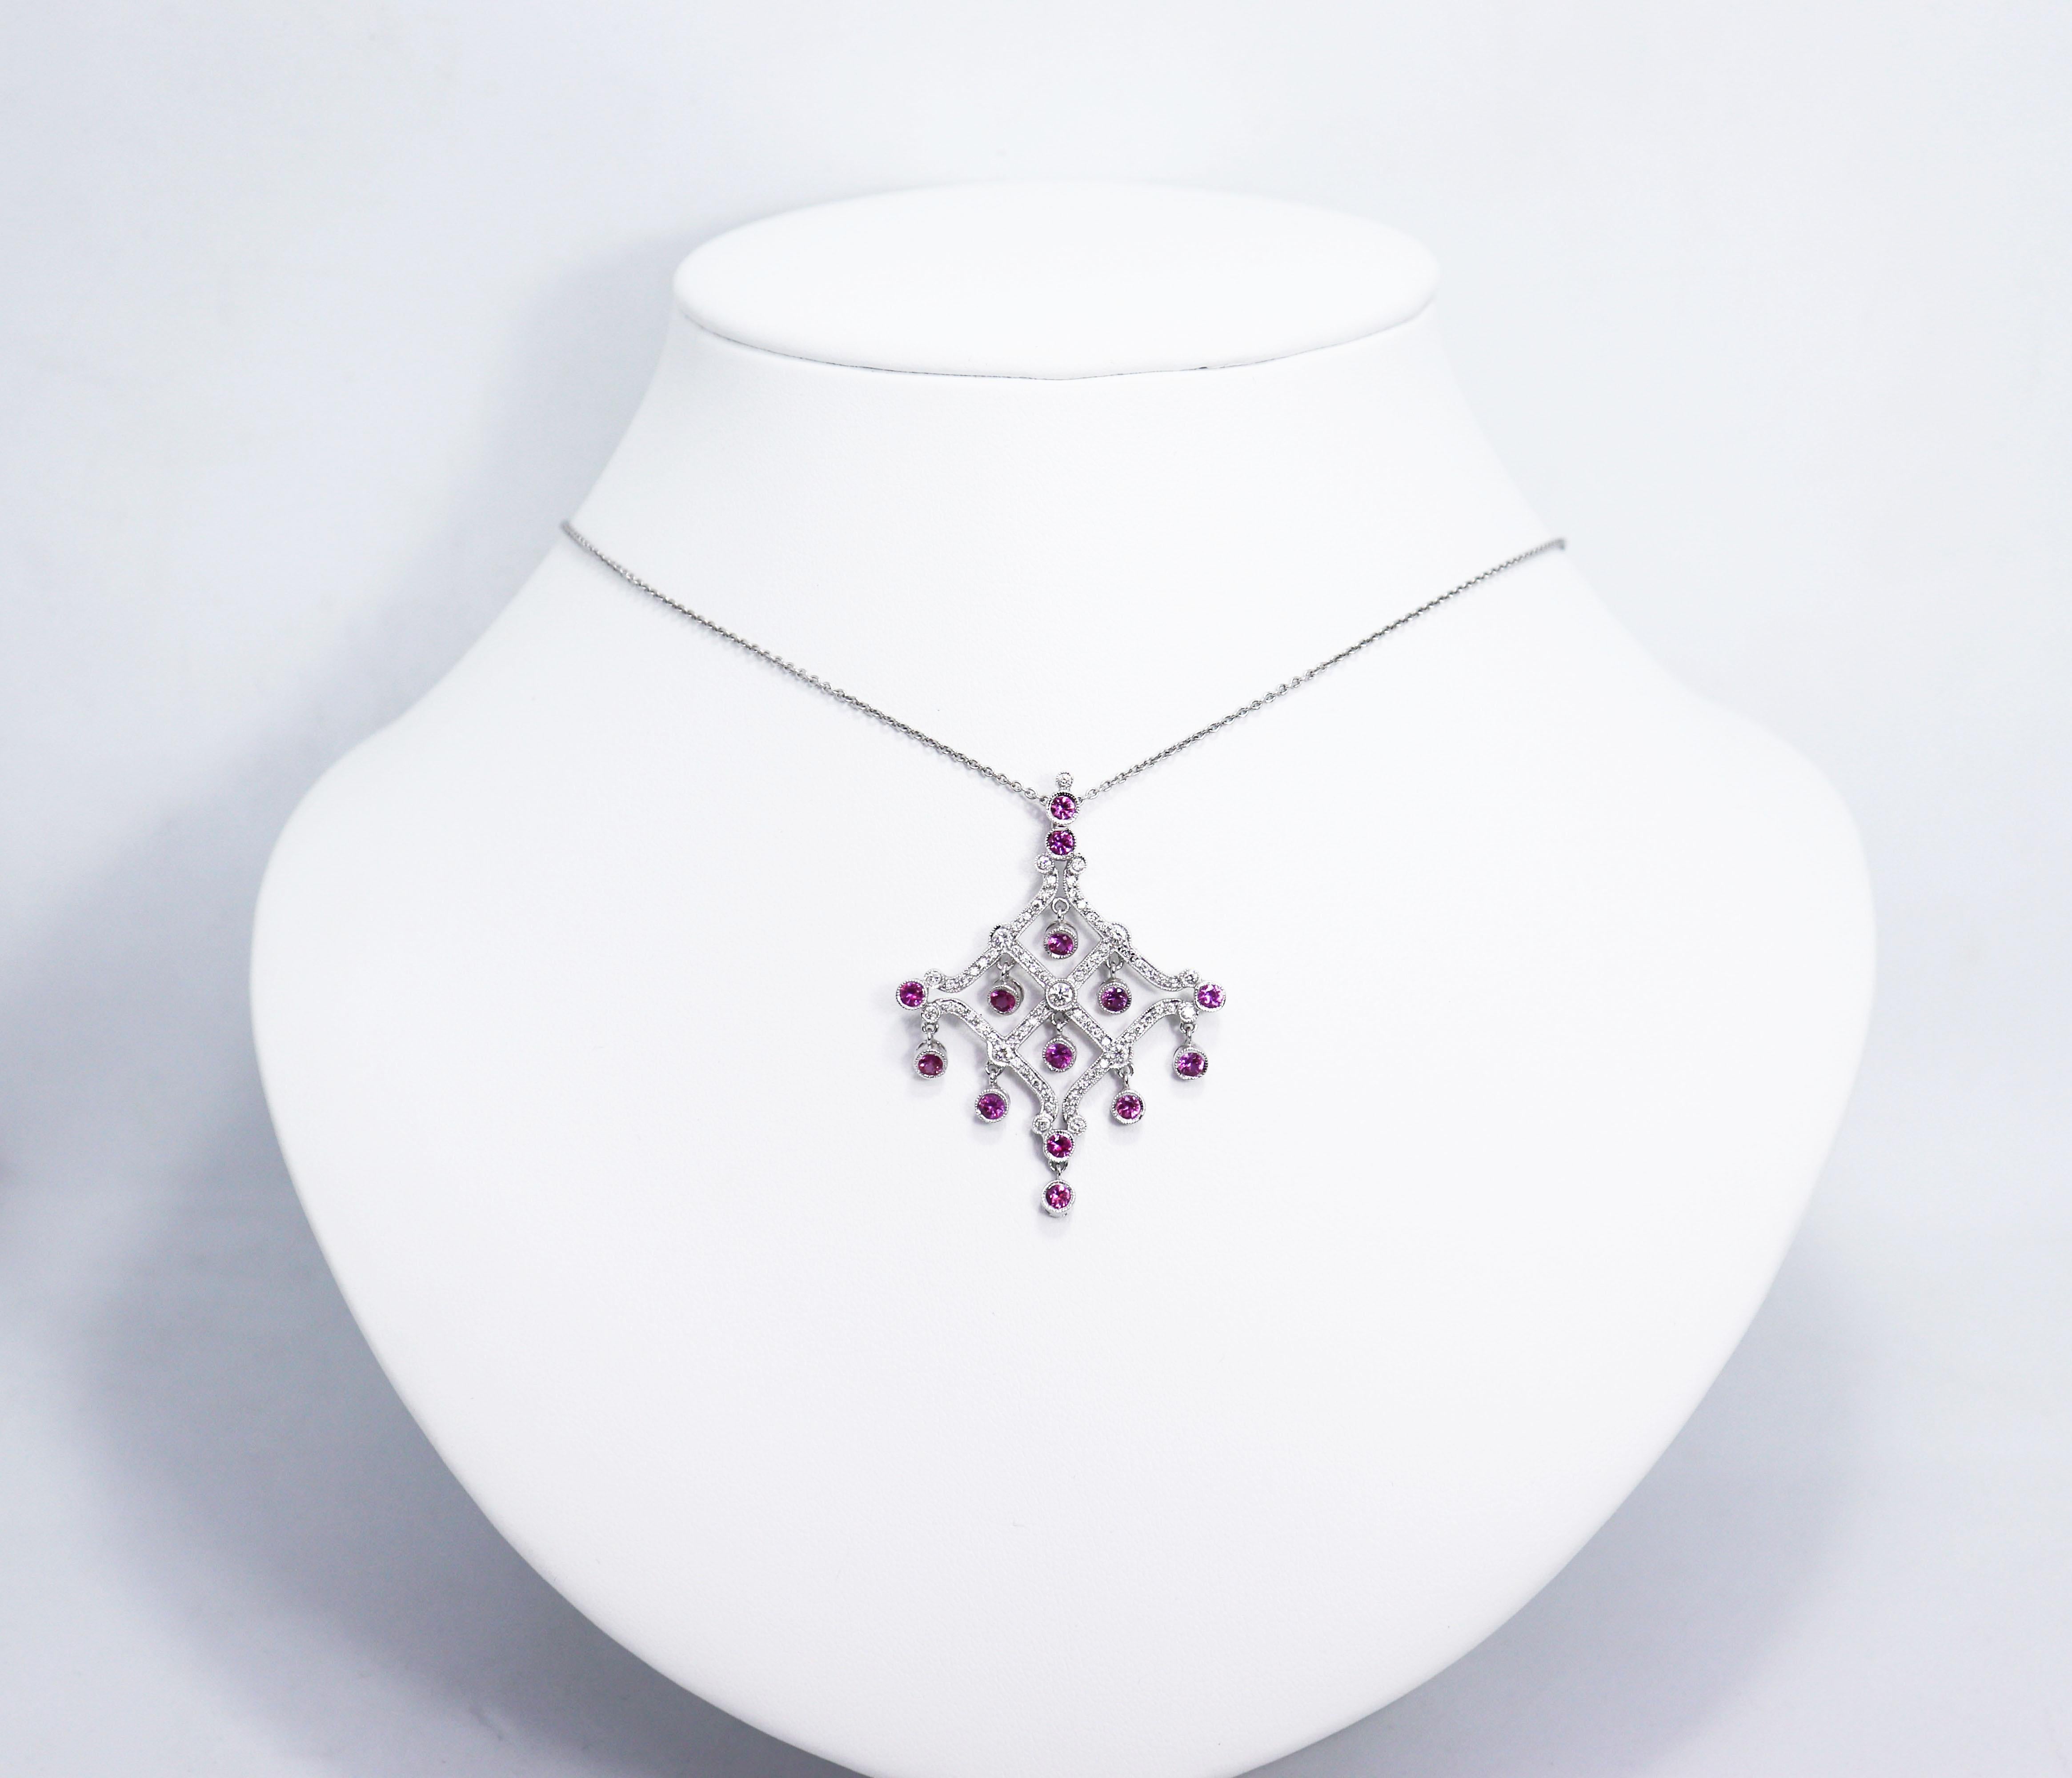 This unique chandelier pendant is beautifully set with 65 round brilliant cut diamonds weighing a total approximate weight of 0.55ct all rubover and grain set in a diamond shaped mount. The pendant is adorned with a cascade of 14 pink sapphires